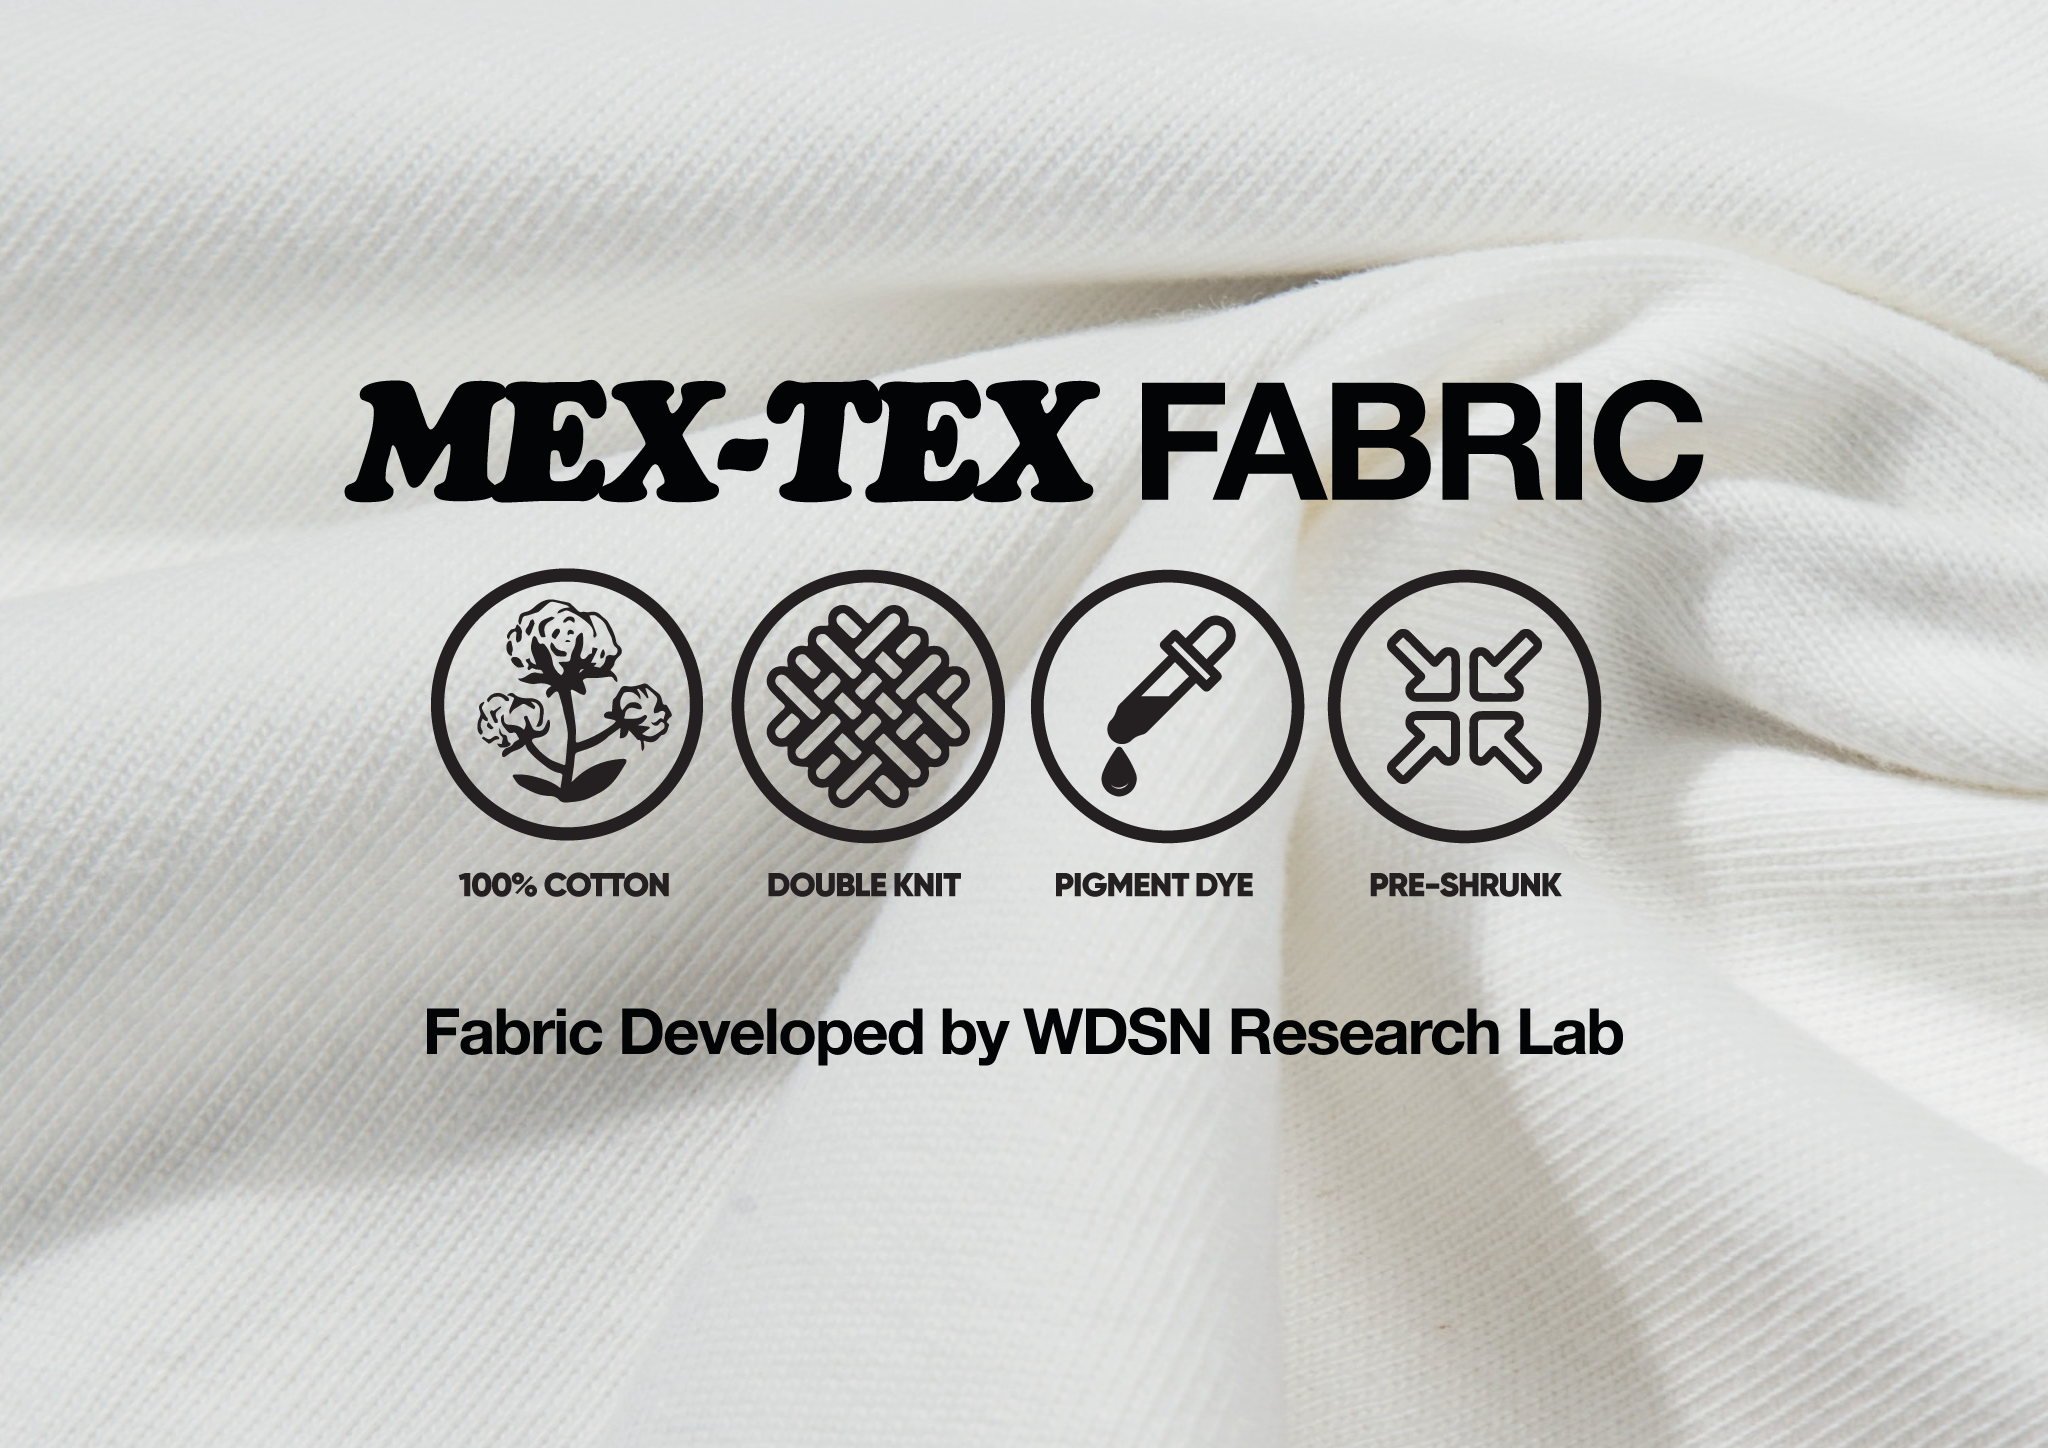 Mextex Fabric by WDSN Research Lab